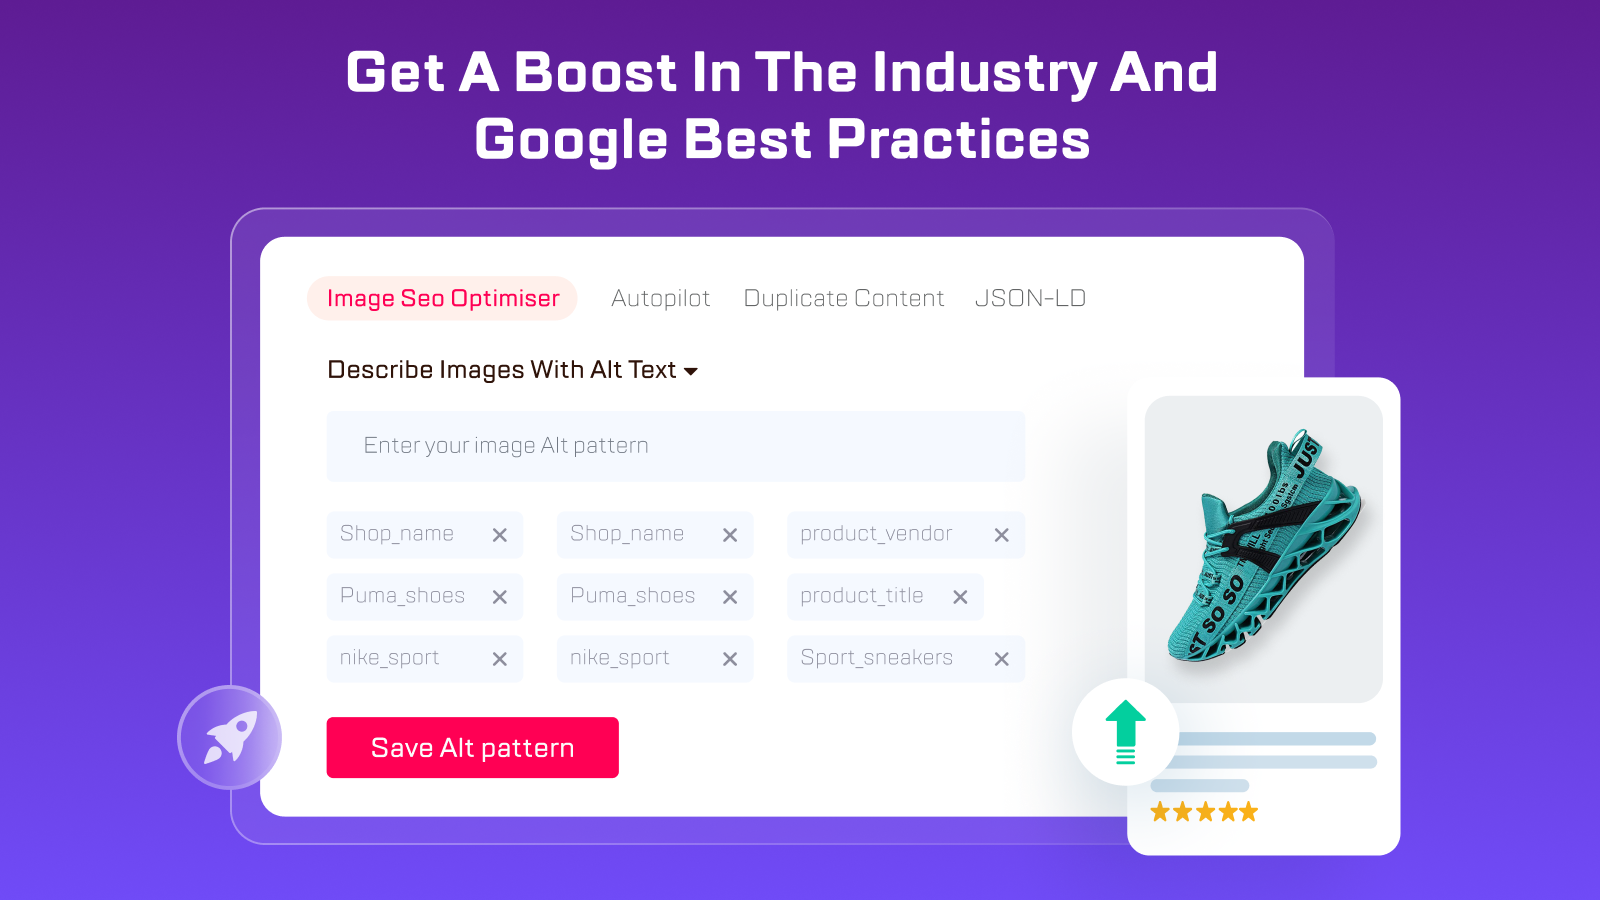 Get A Boost In The Industry And Google Best Practices